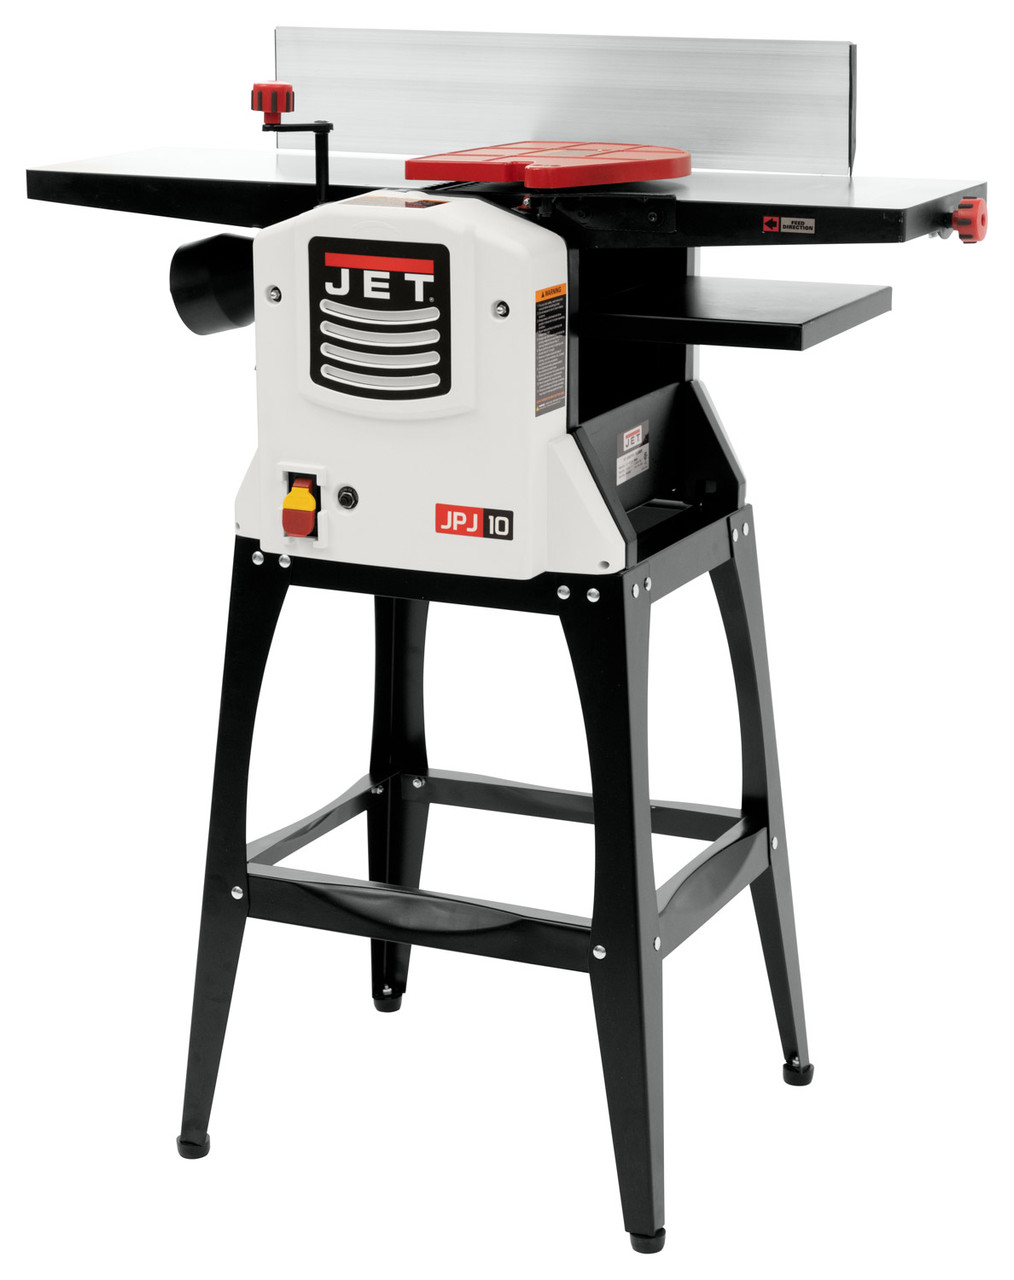 Jet, JJP-10BTOS, 10" Jointer / Planer Combo with Stand